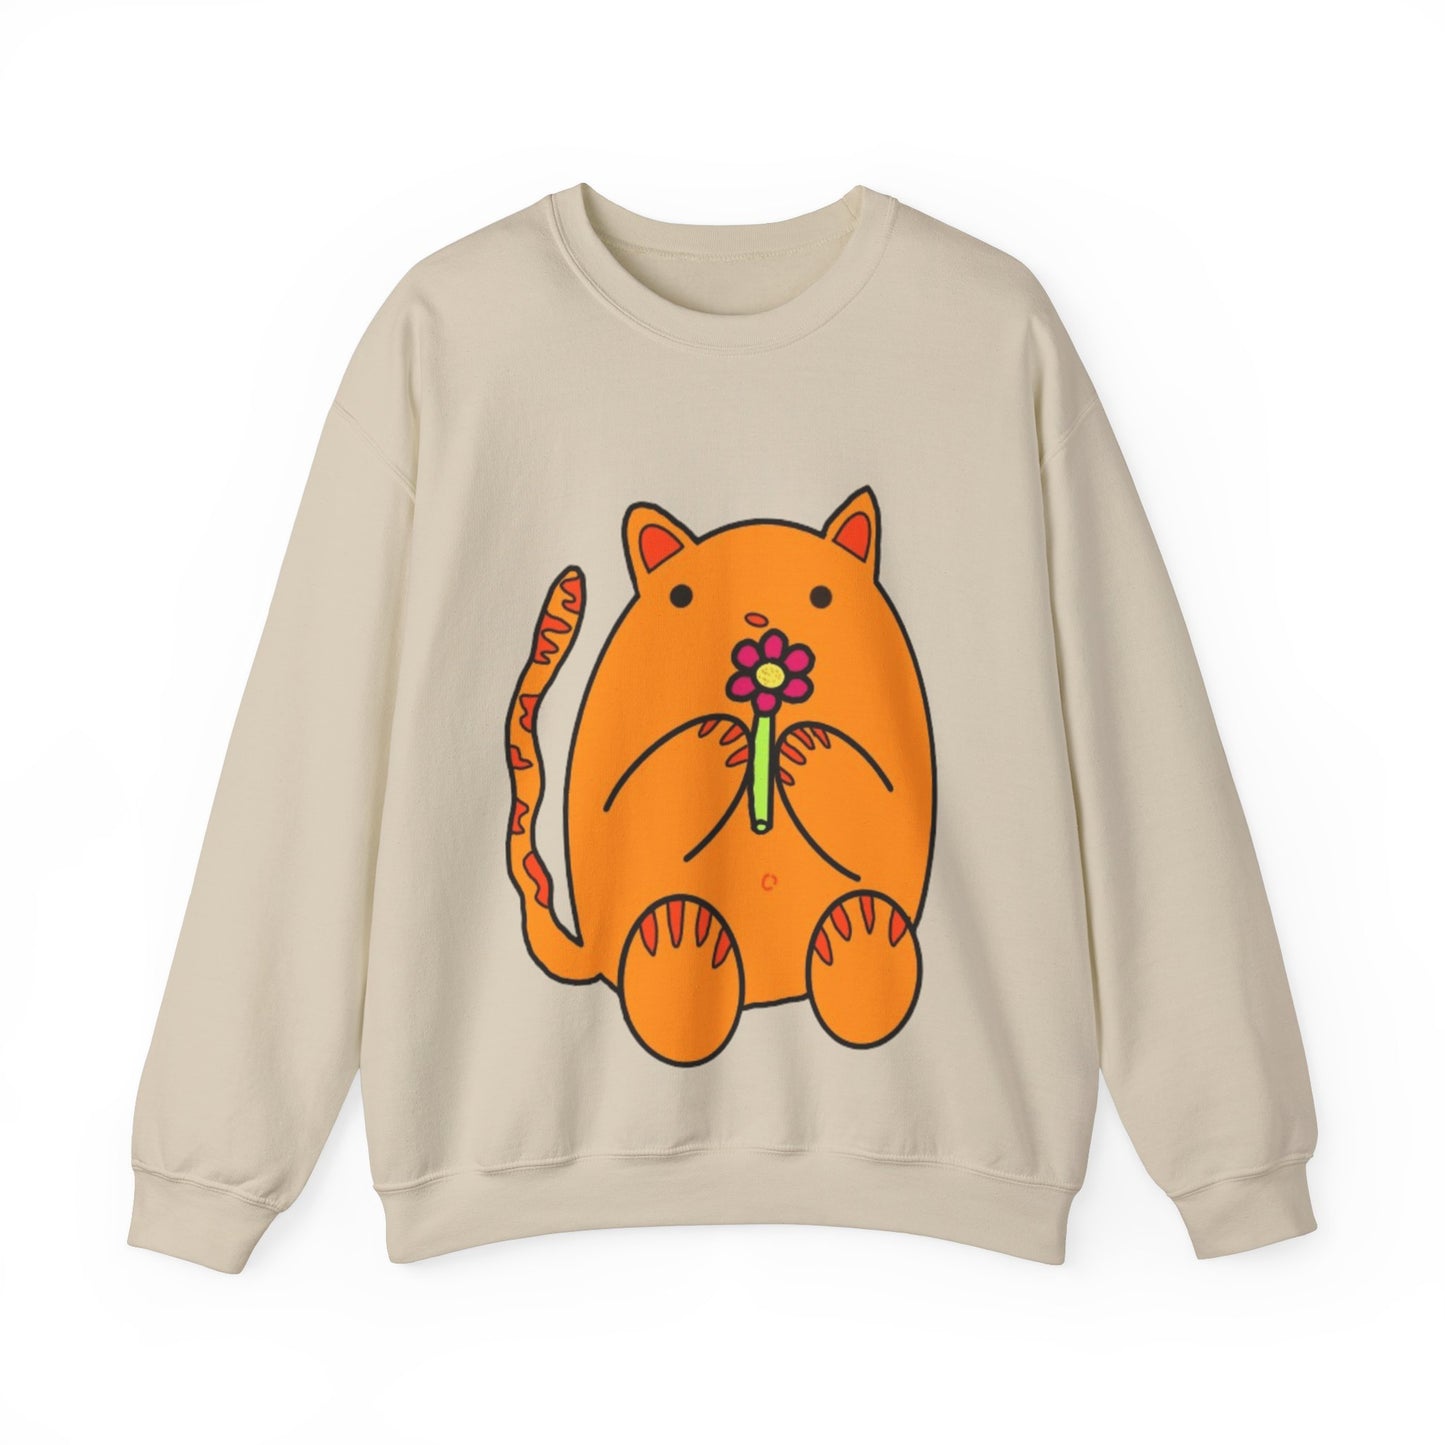 Stop and Smell The Flowers Crewneck